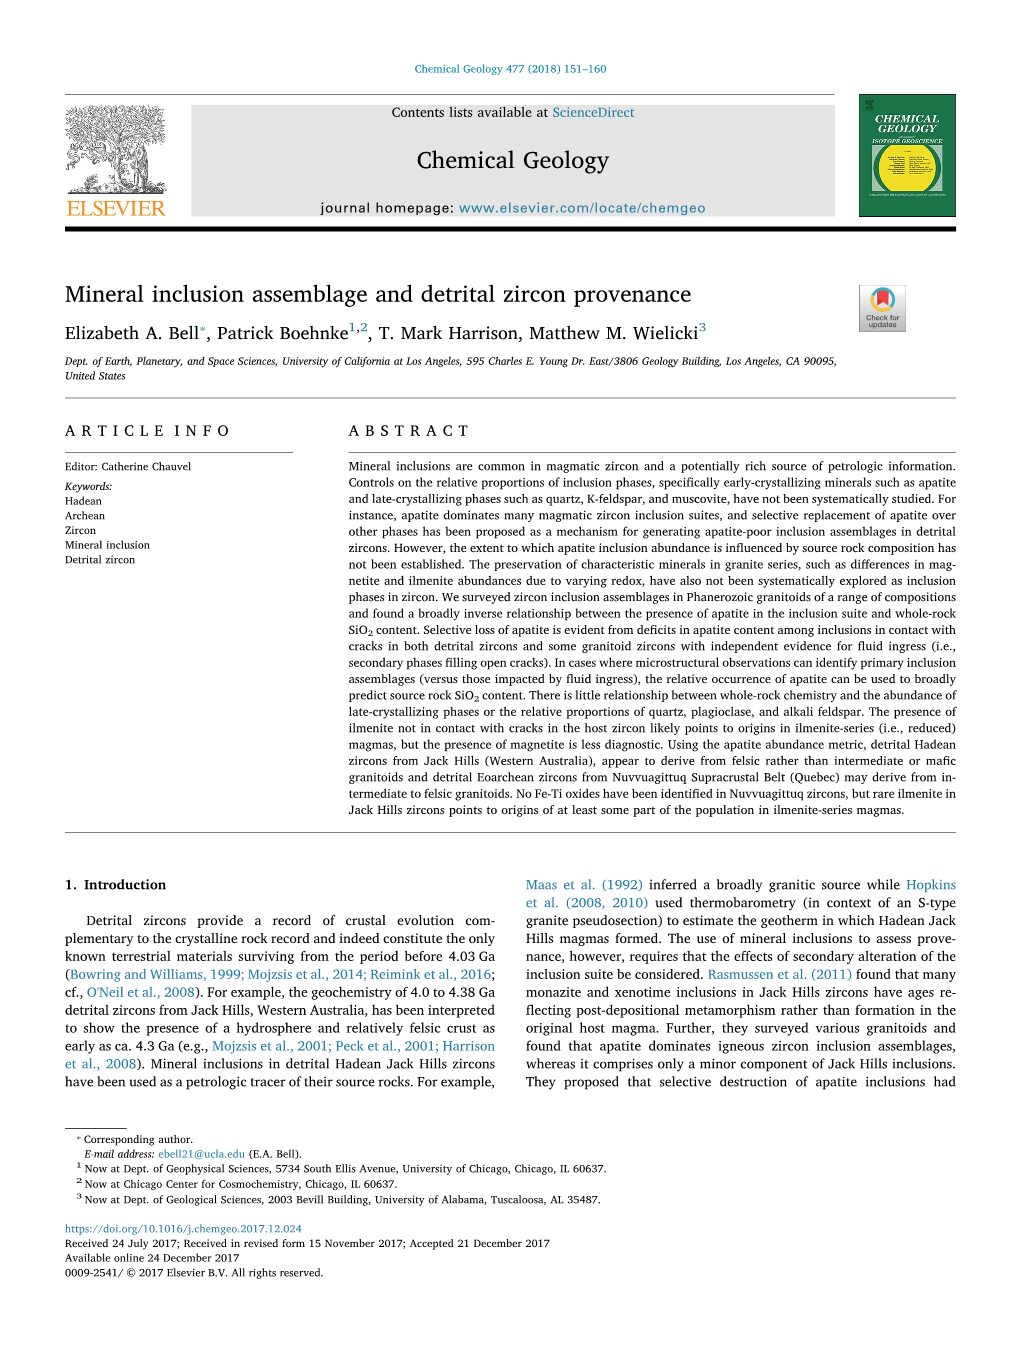 Chemical Geology Mineral Inclusion Assemblage and Detrital Zircon